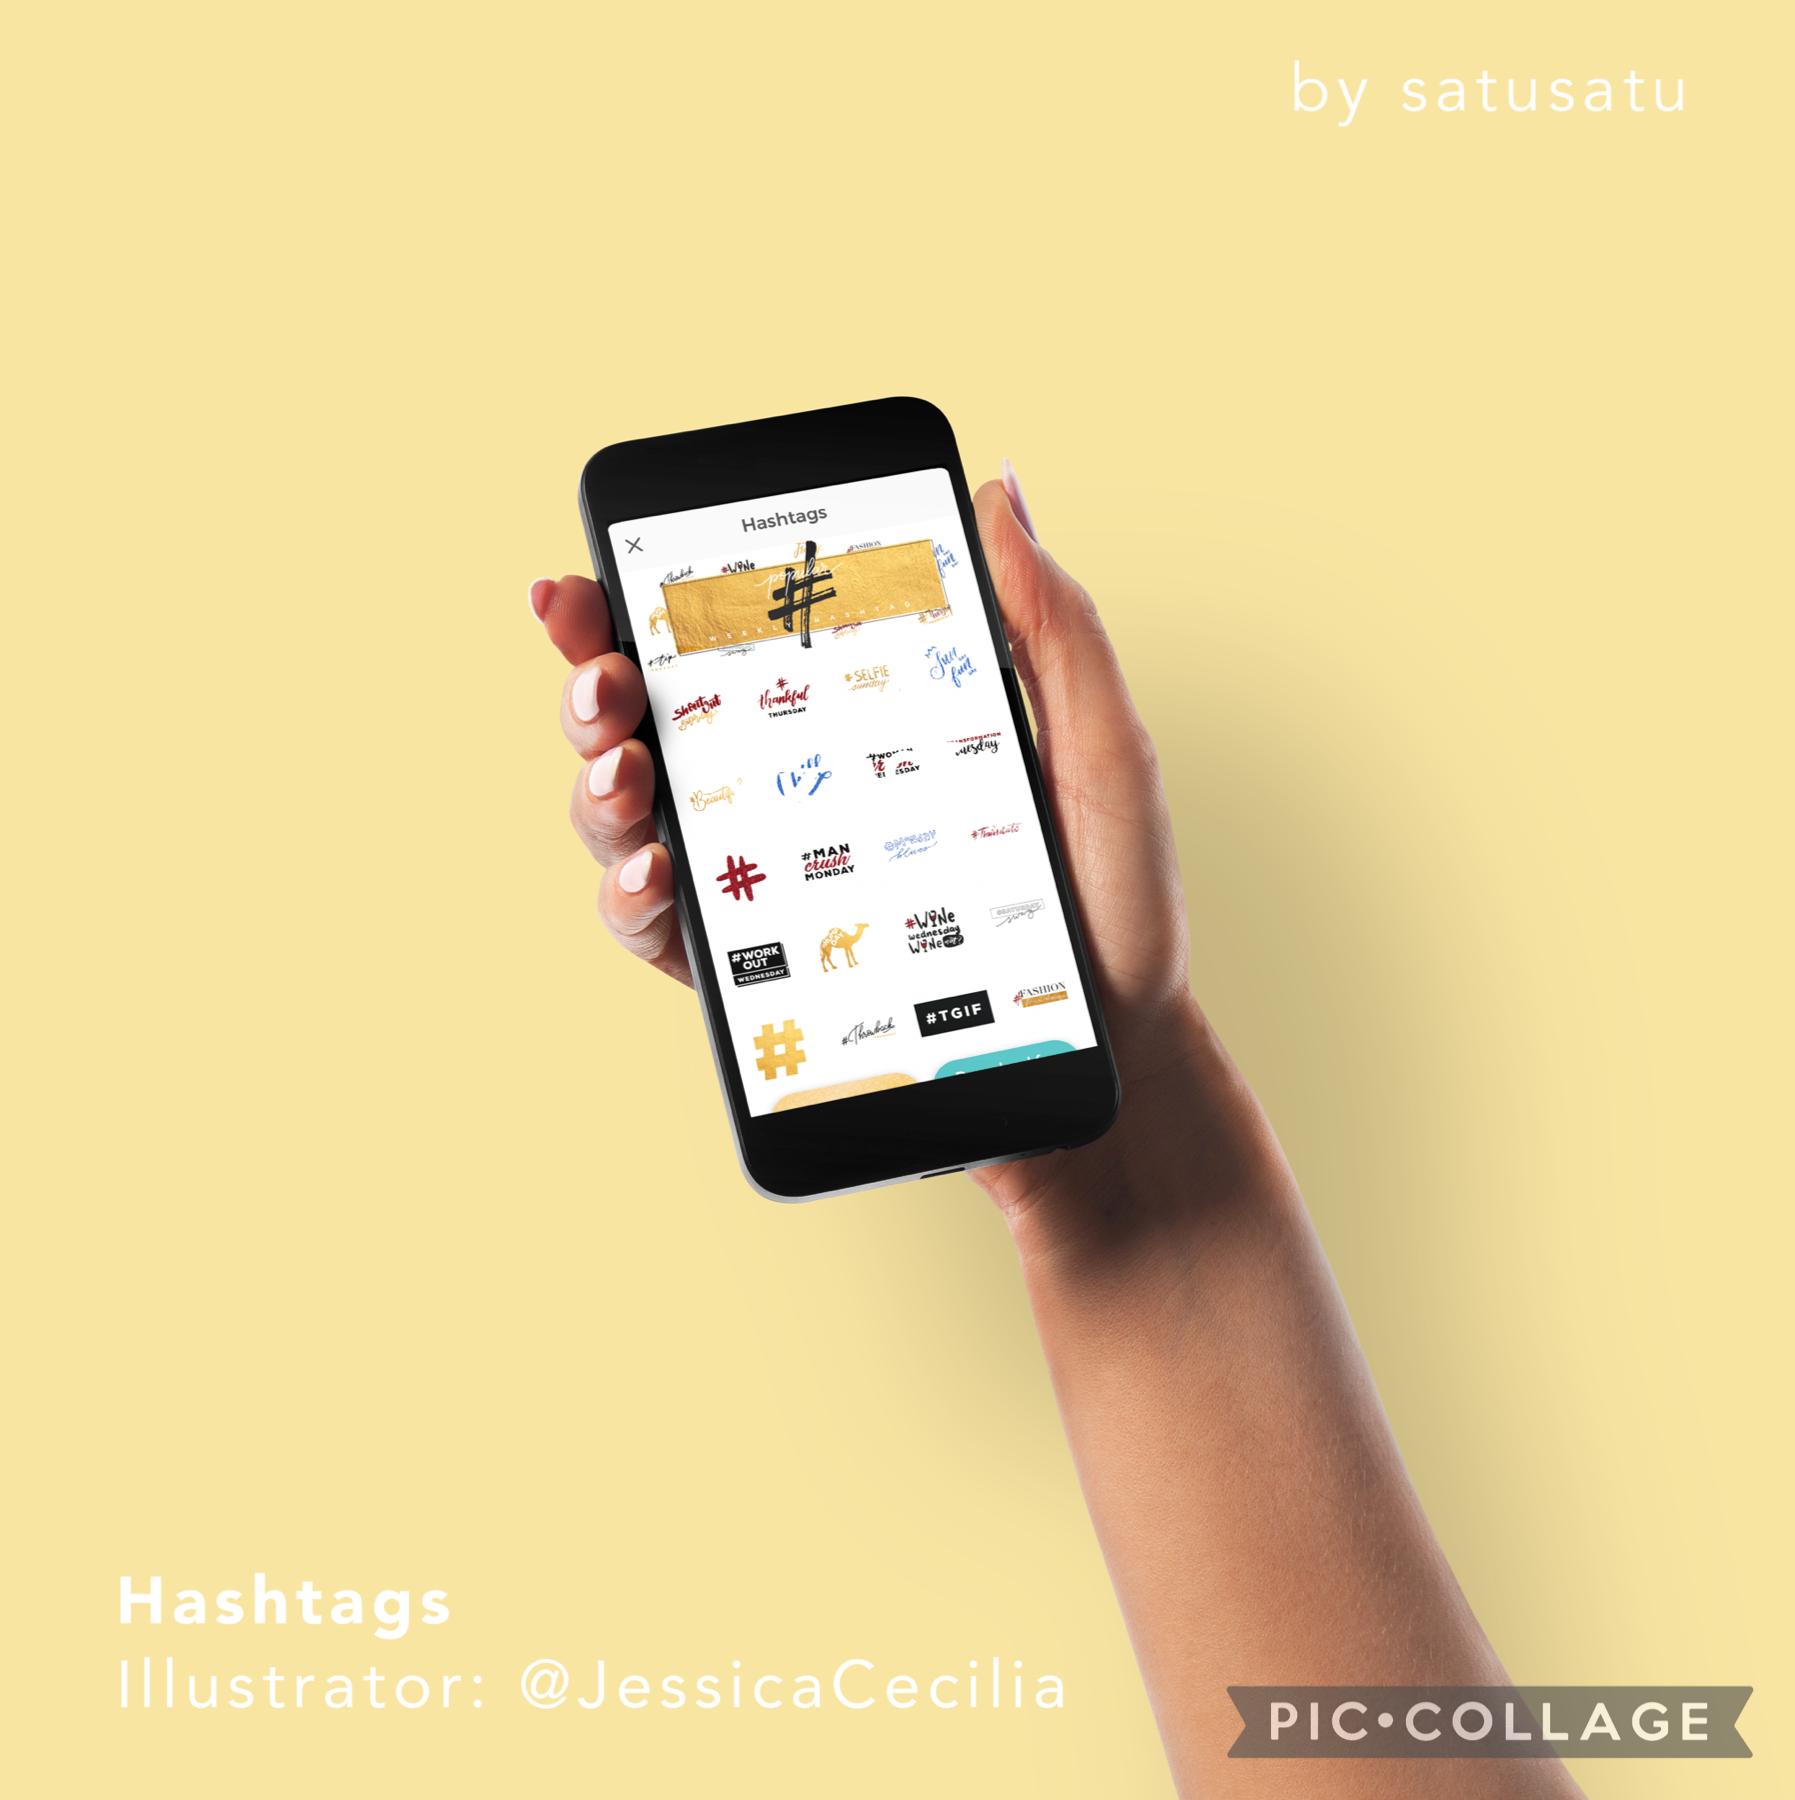 Popular Hashtags Stickerpack is available for downloads on PicCollage app!

#OriginalStickerpack #piccollage #challenge #hashtags #satusatu #onebyone